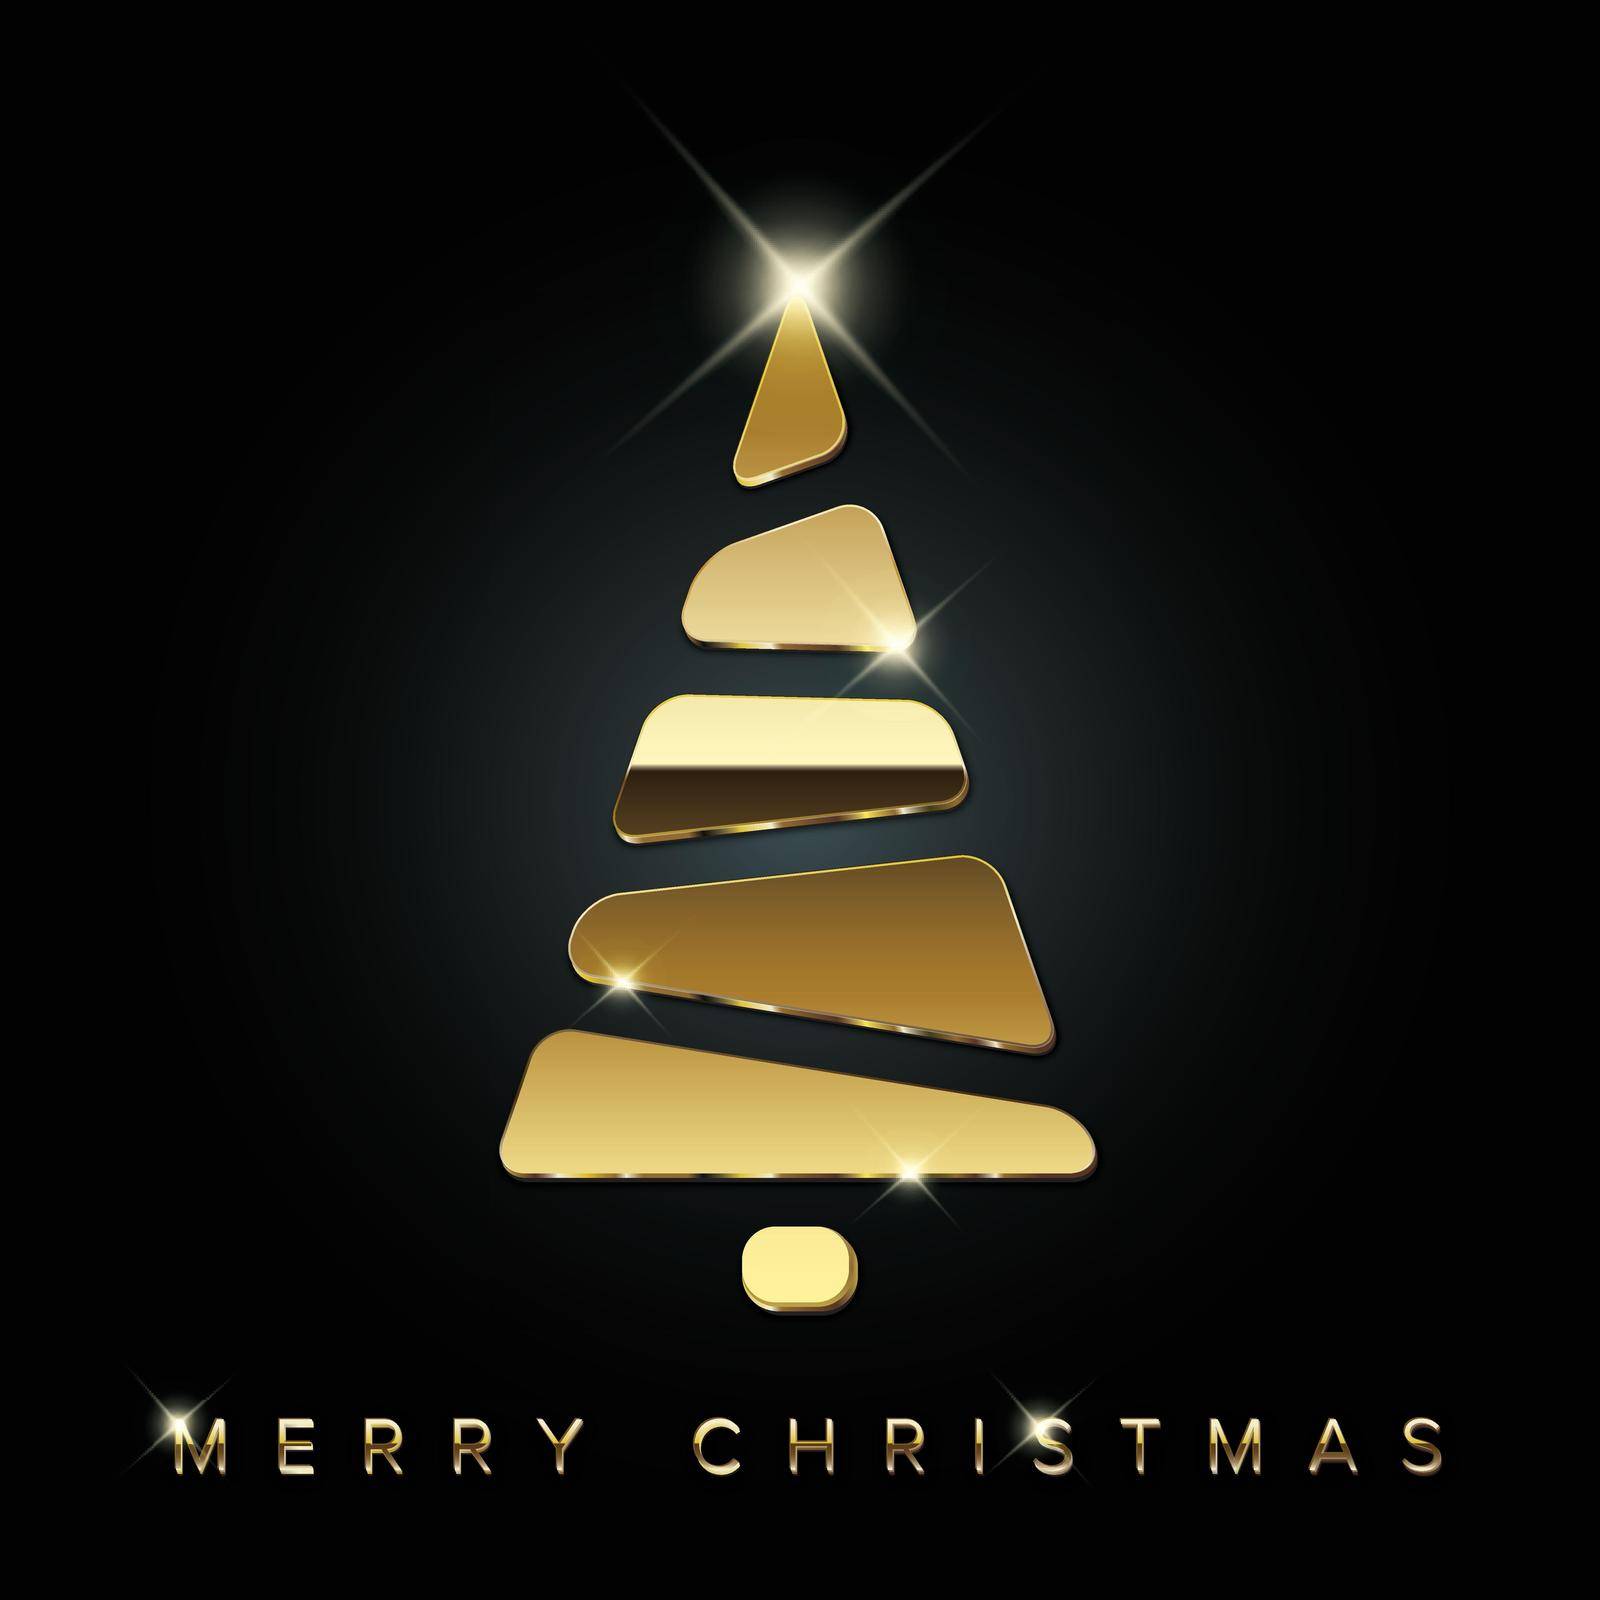 Simple vector christmas card with abstract golden christmas tree made from blocks - original new year card